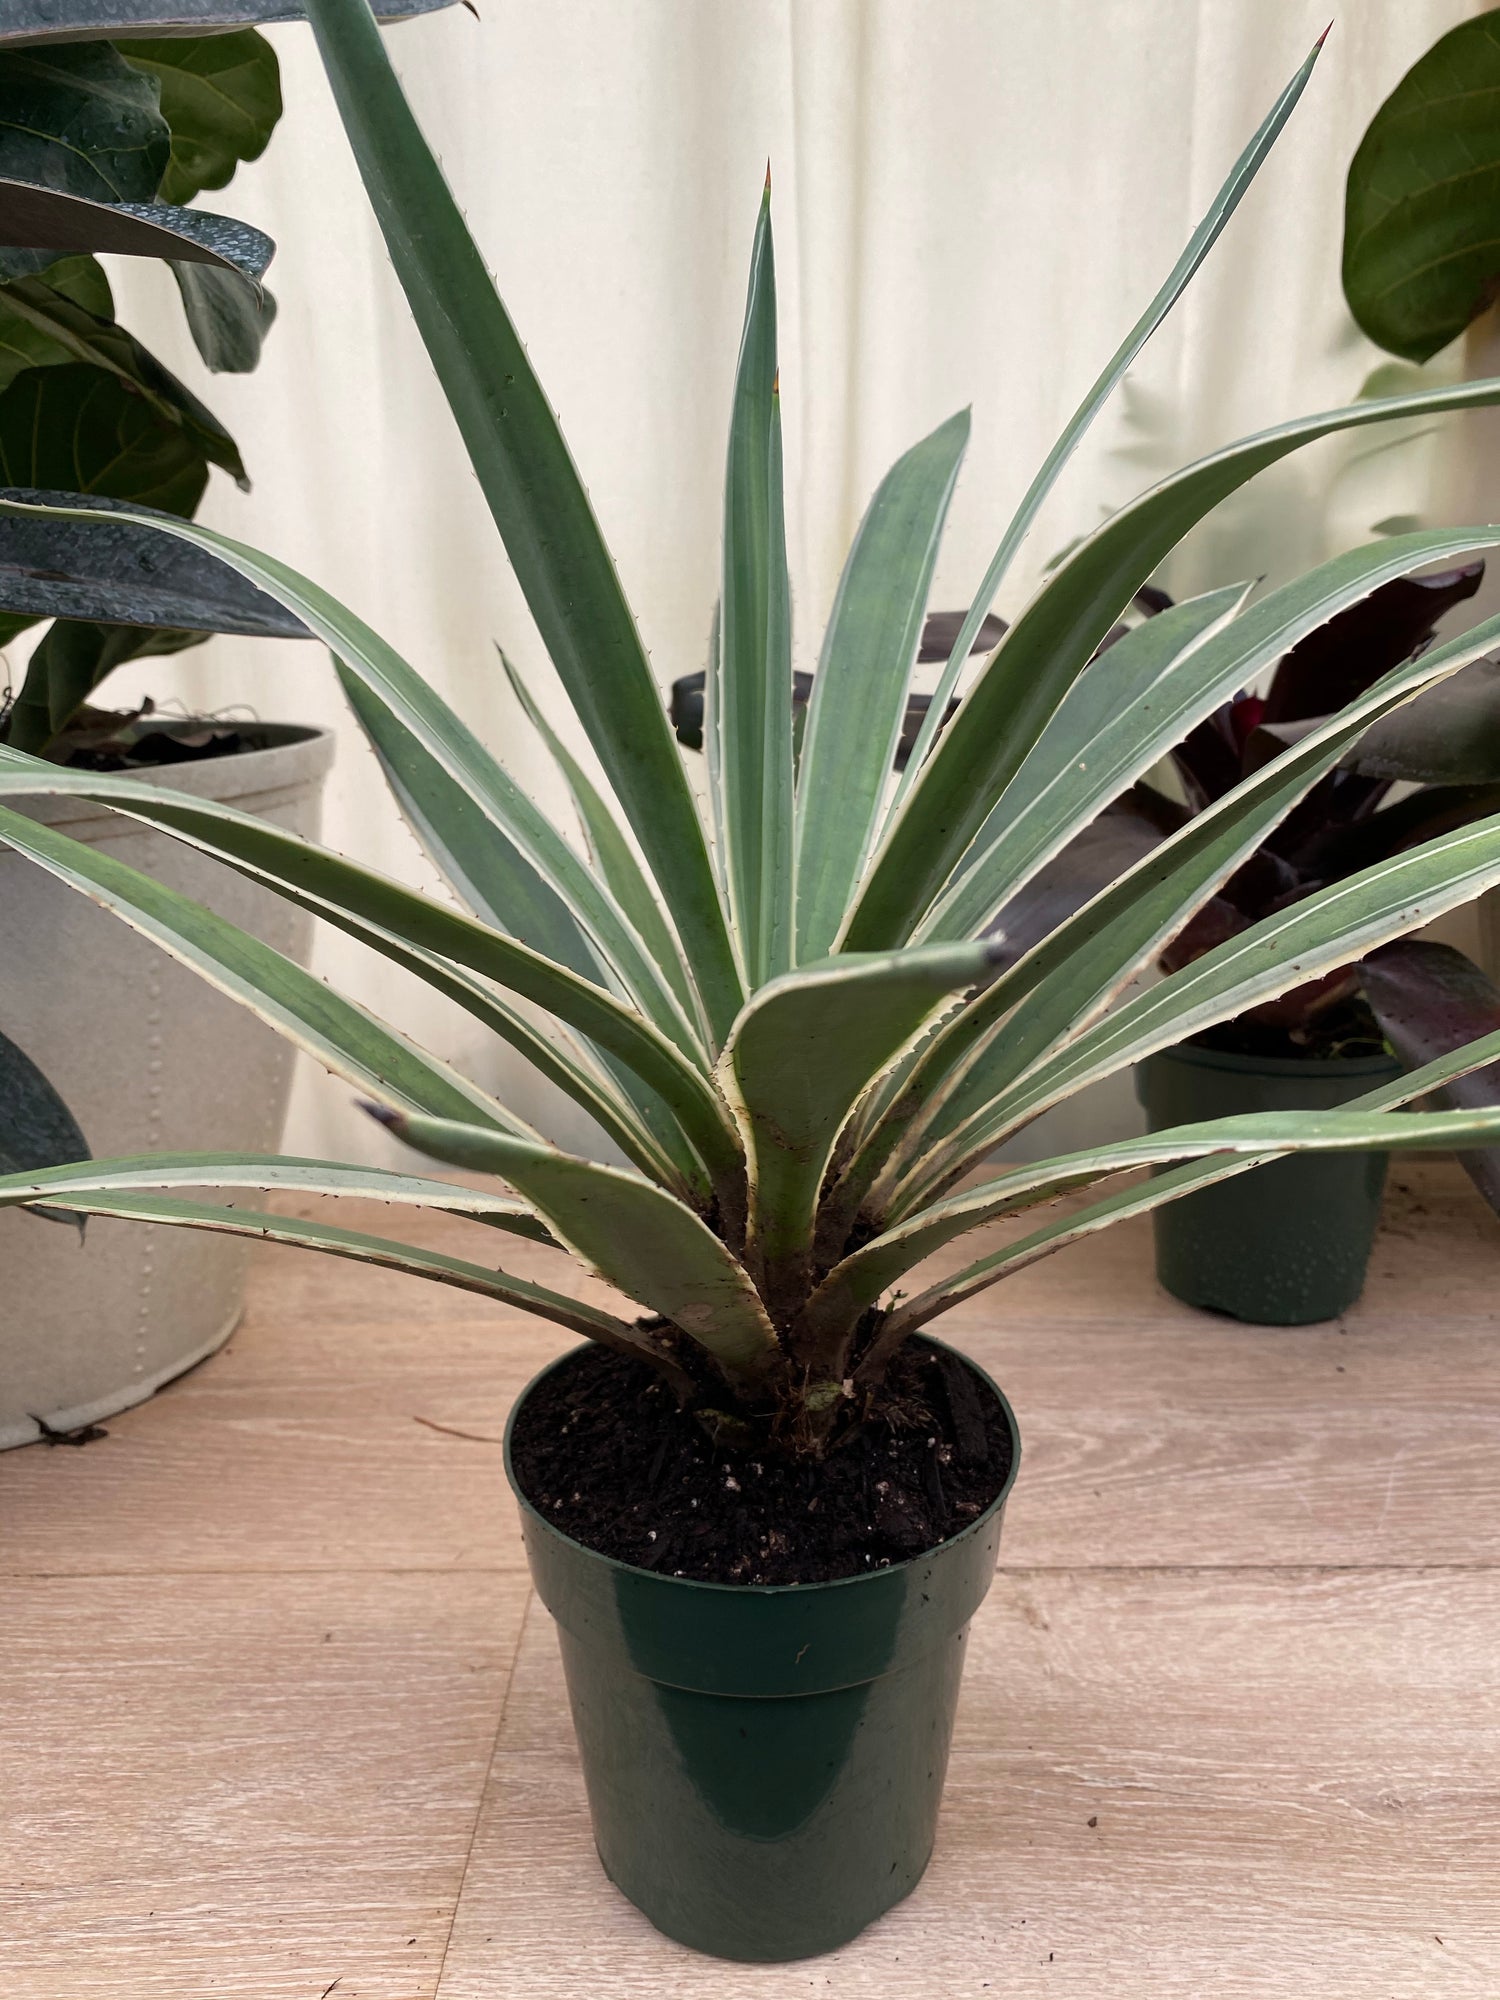 Agave Angustifolia, Caribbean Agave in a pot